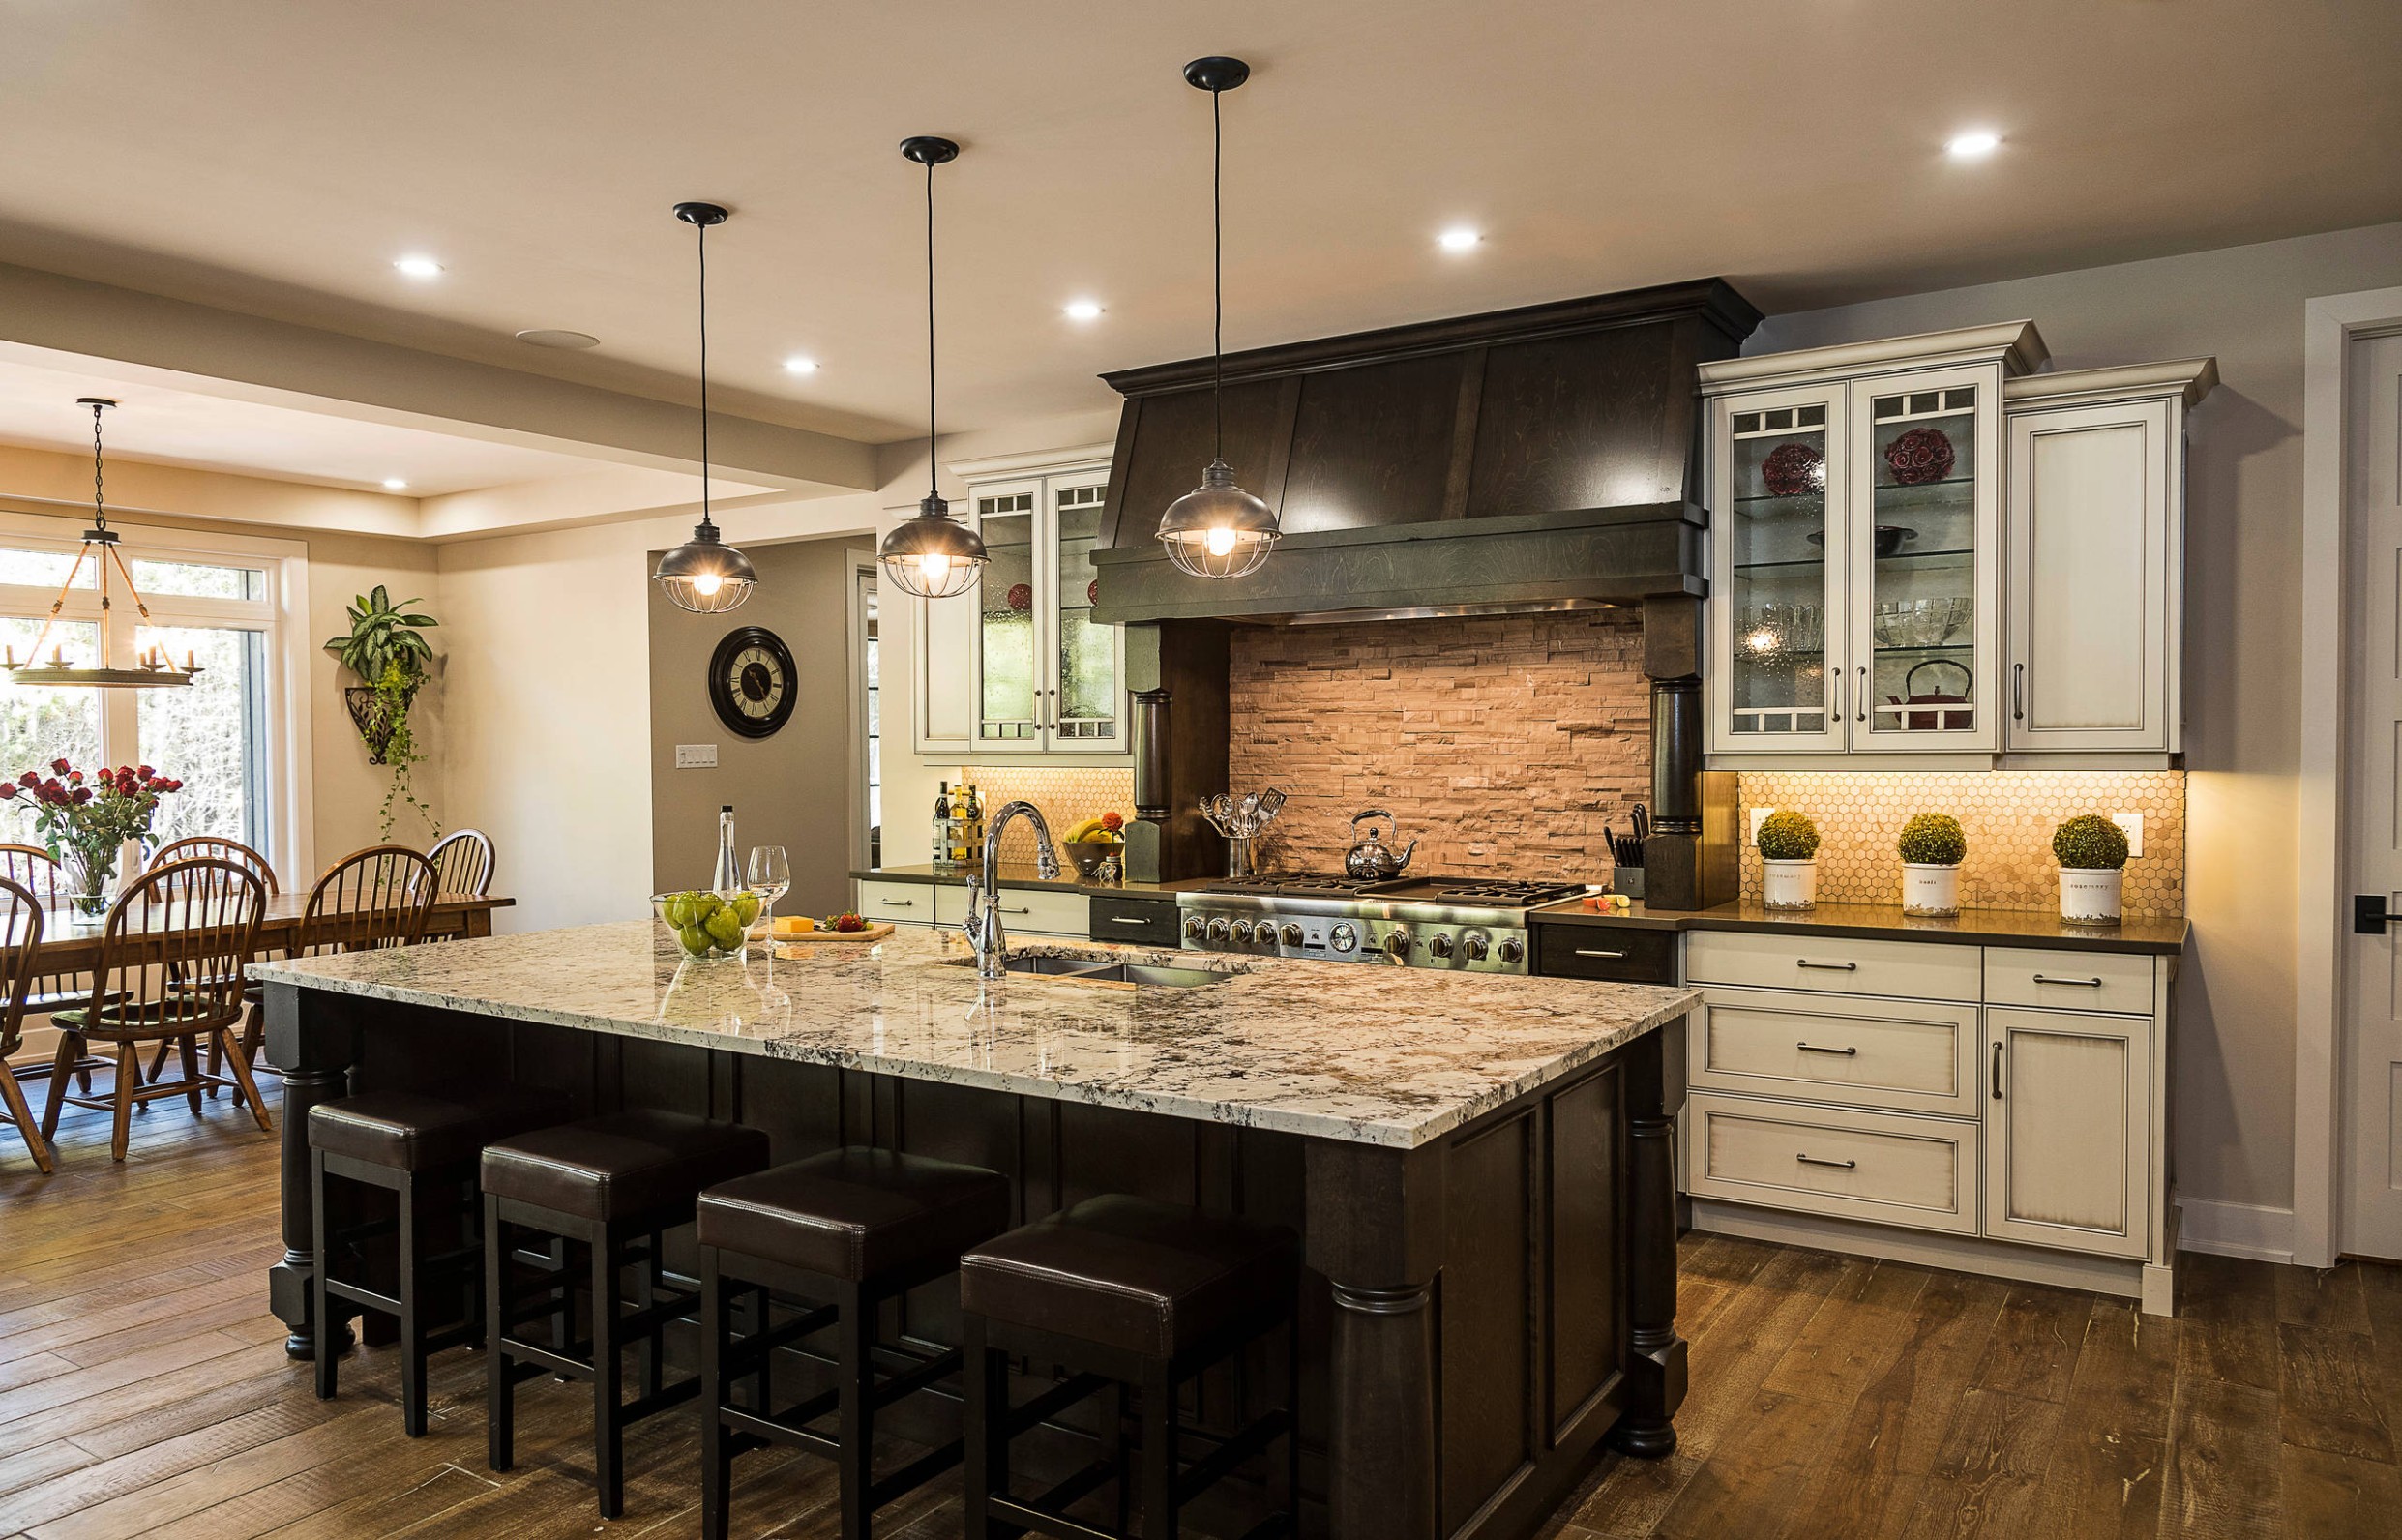 What is Traditional Kitchen Design? - traditional kitchen definition